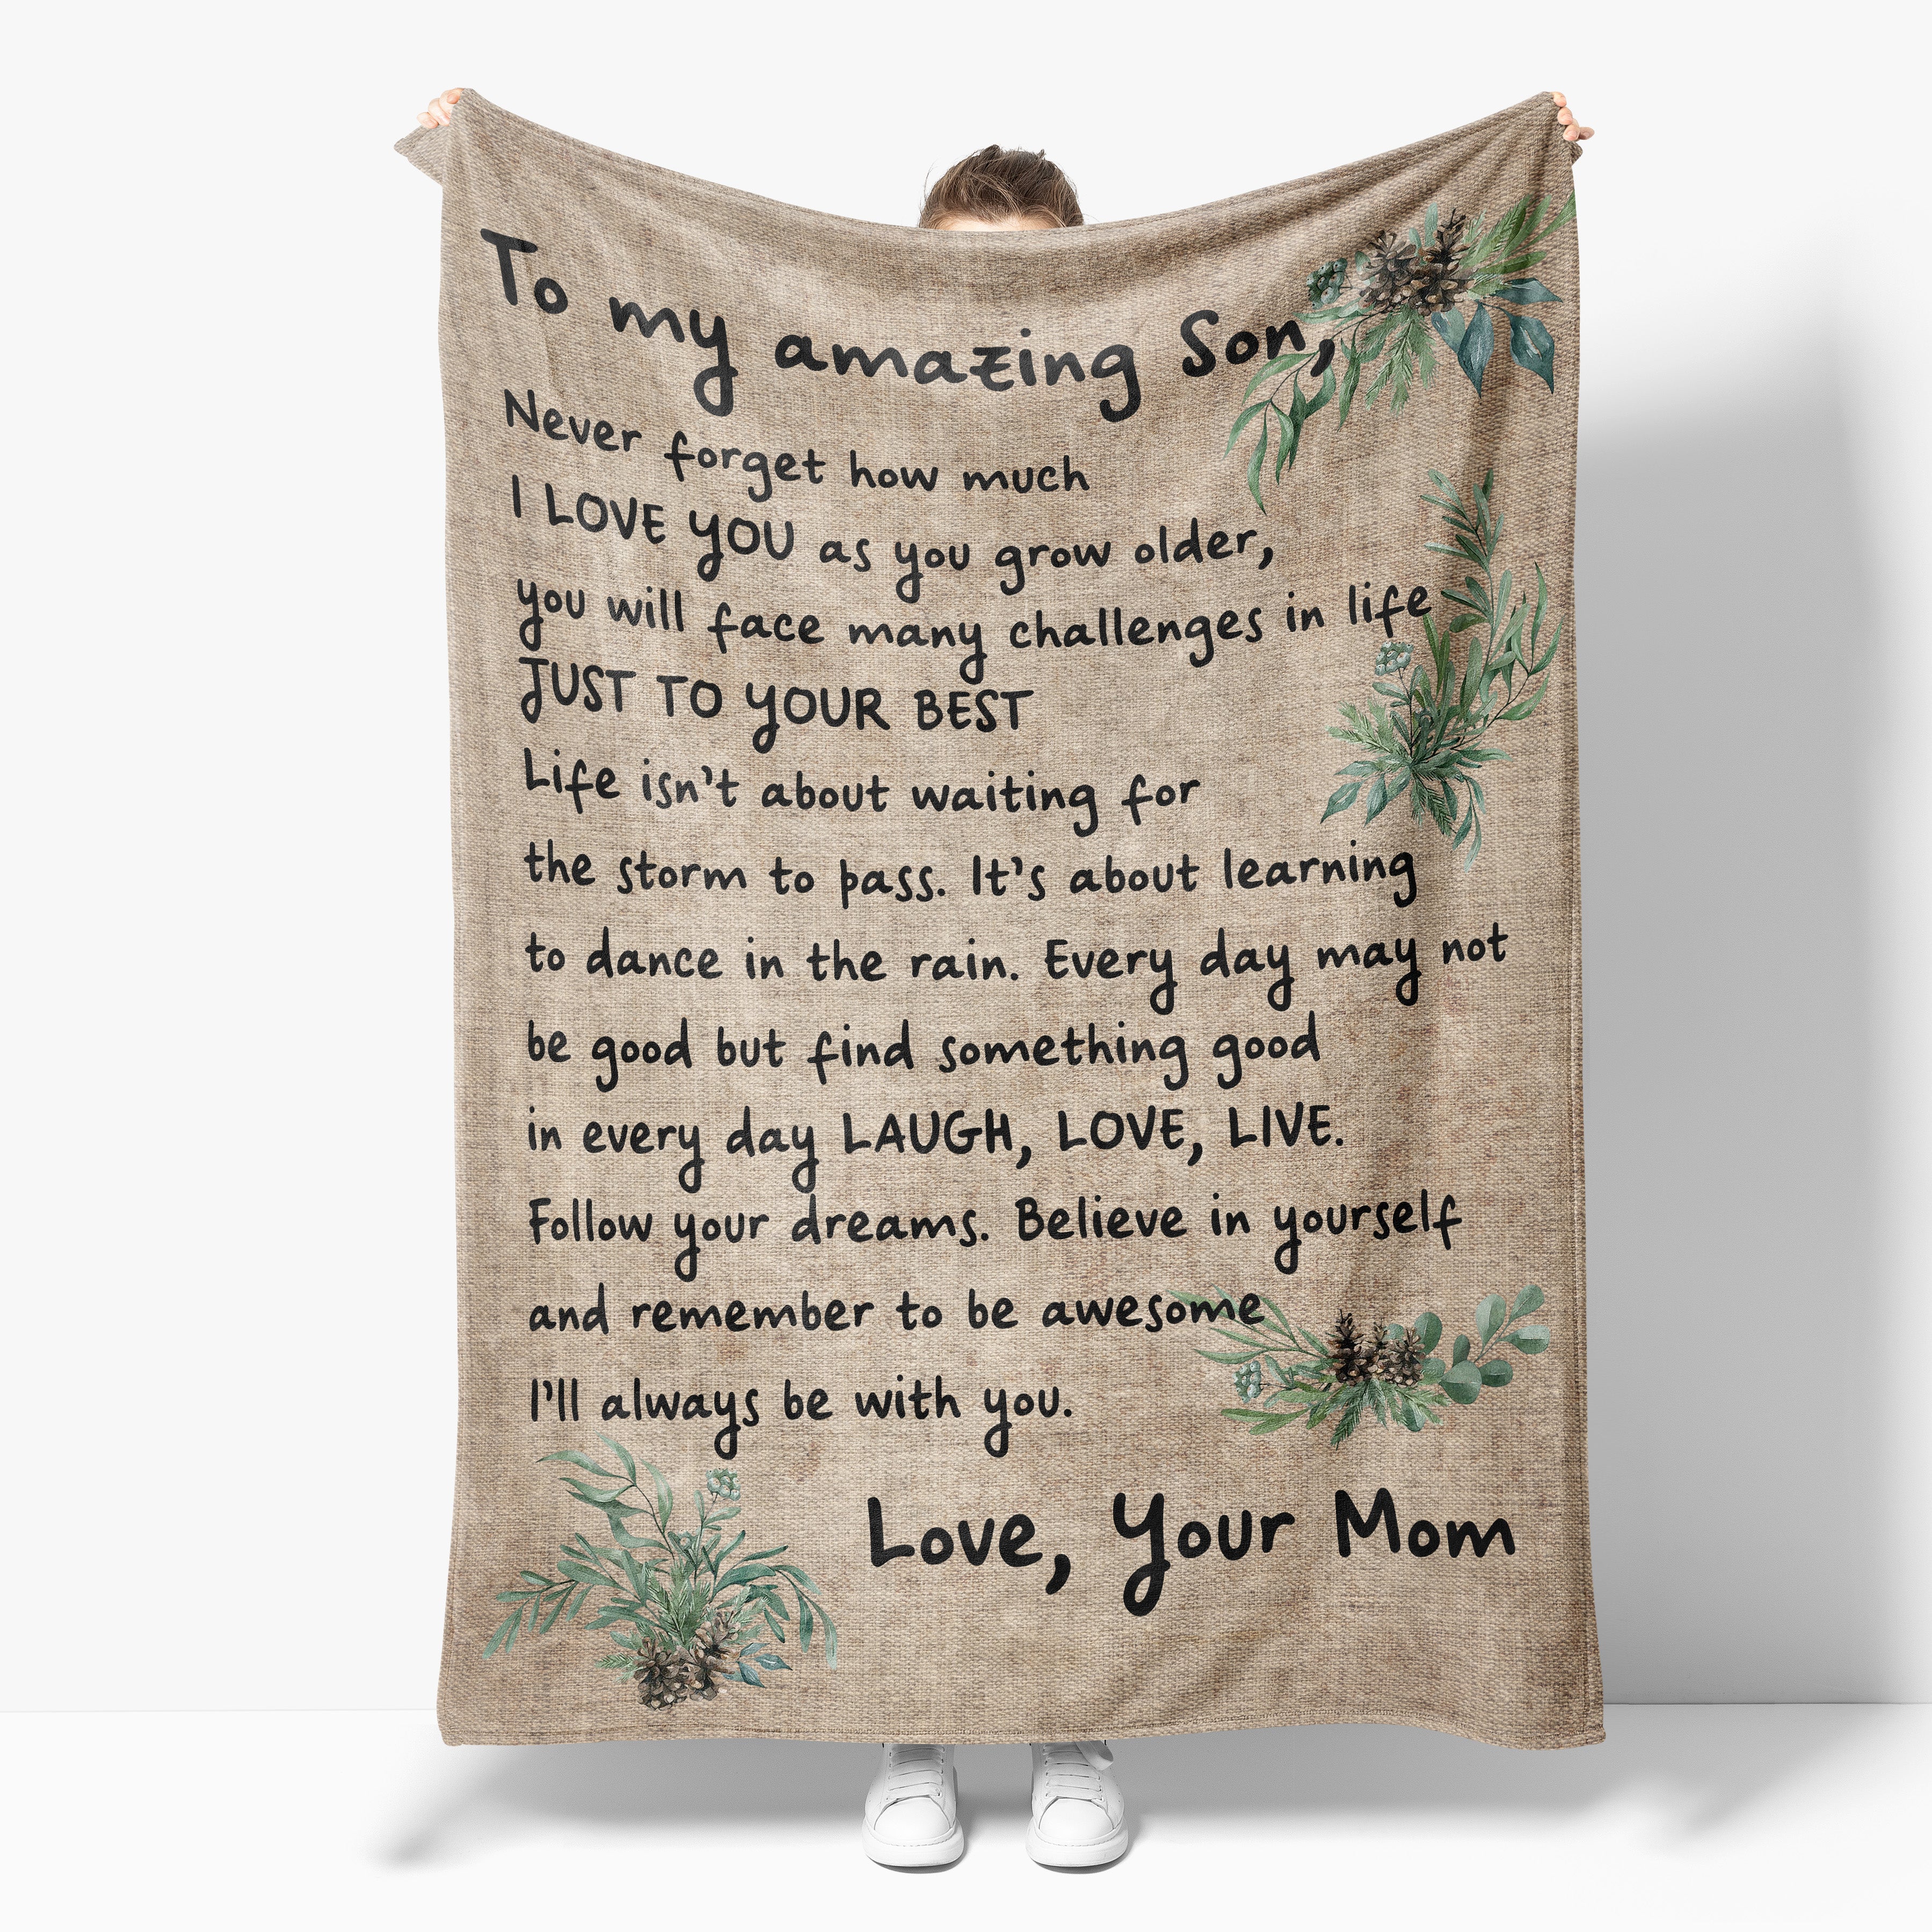 Blanket Gifts For Sons From Mothers, Gifts For Adult Son, Your Journey,  Gifts For 18 Year Old Son, Gifts For Your Son, Mother Son Gift Ideas -  Sweet Family Gift